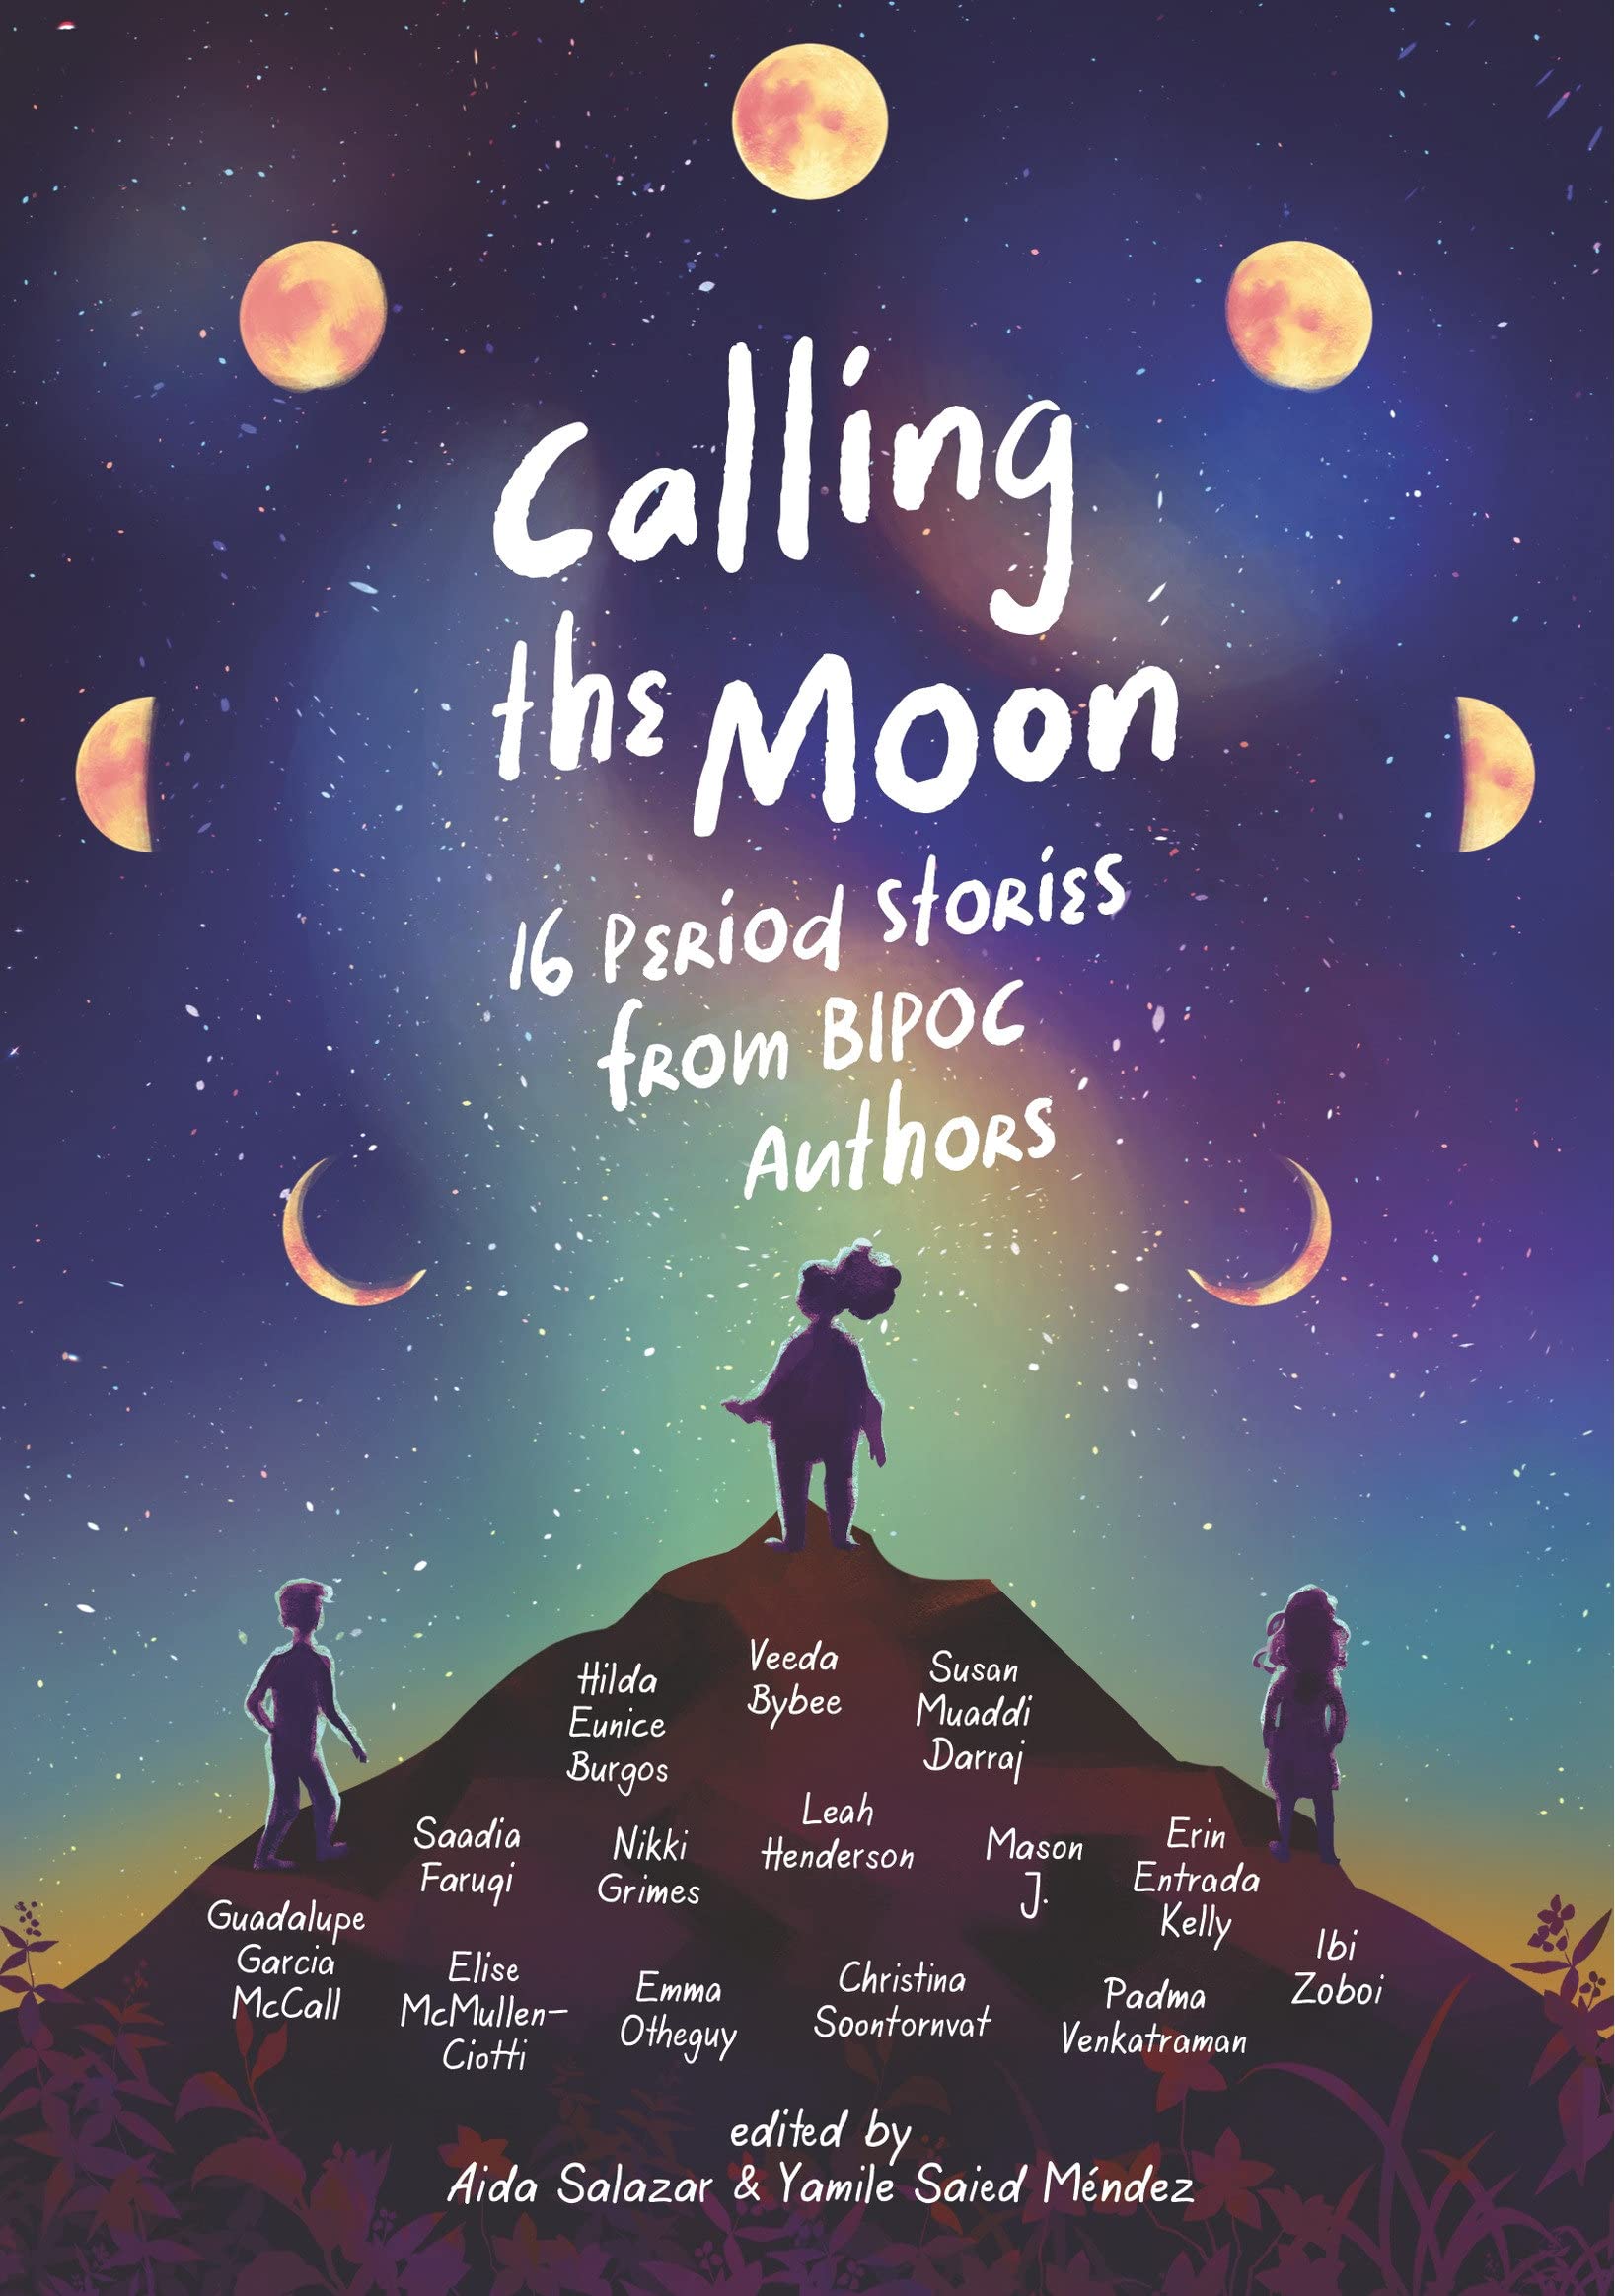 Calling the Moon—25 Best New Books for 7th Graders